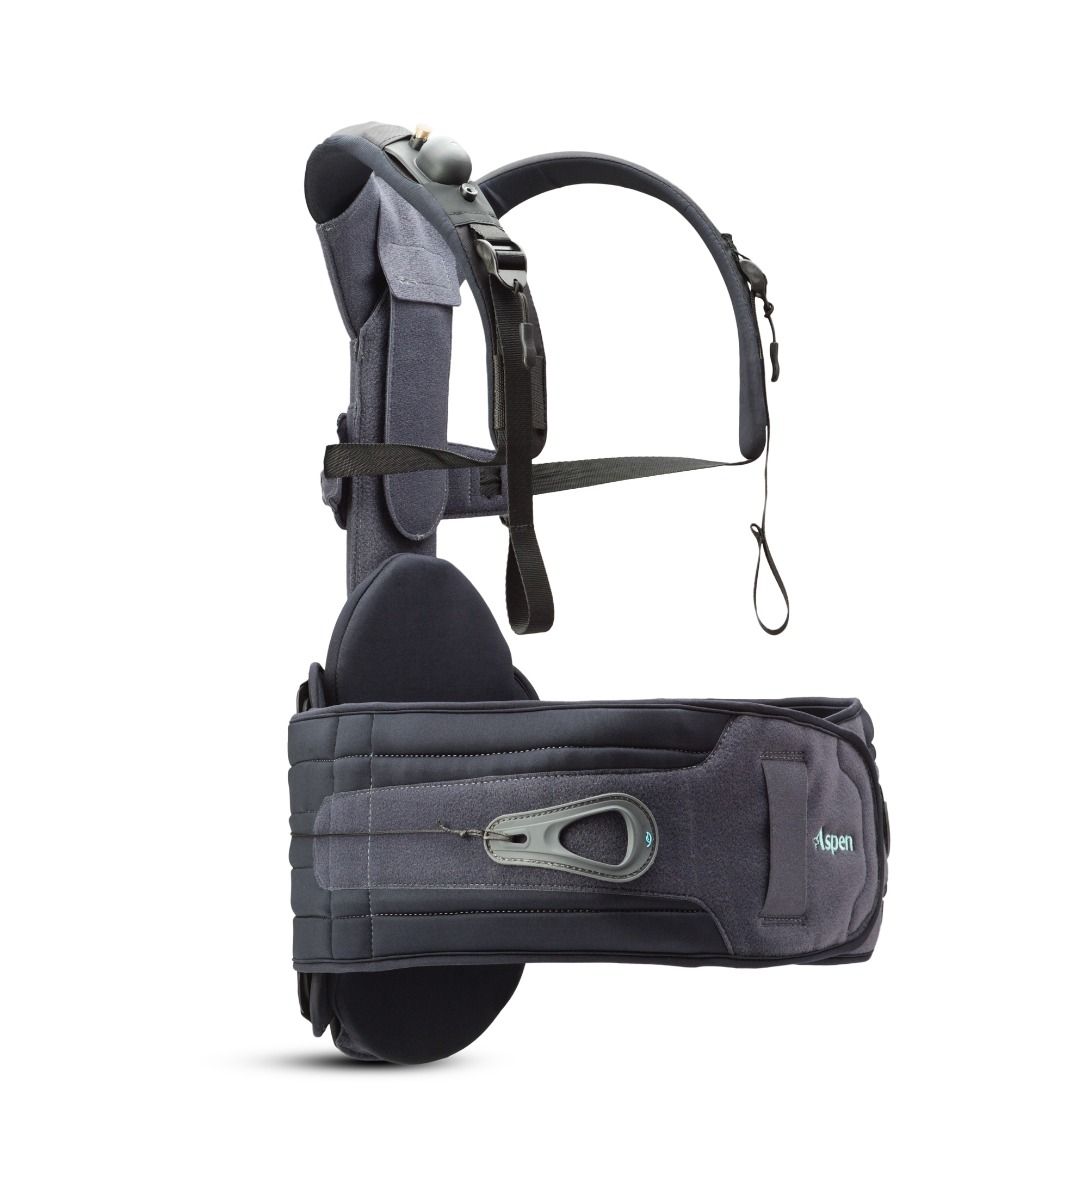 Spine and Hip DME Products - Tactical Rehabilitation, Inc.